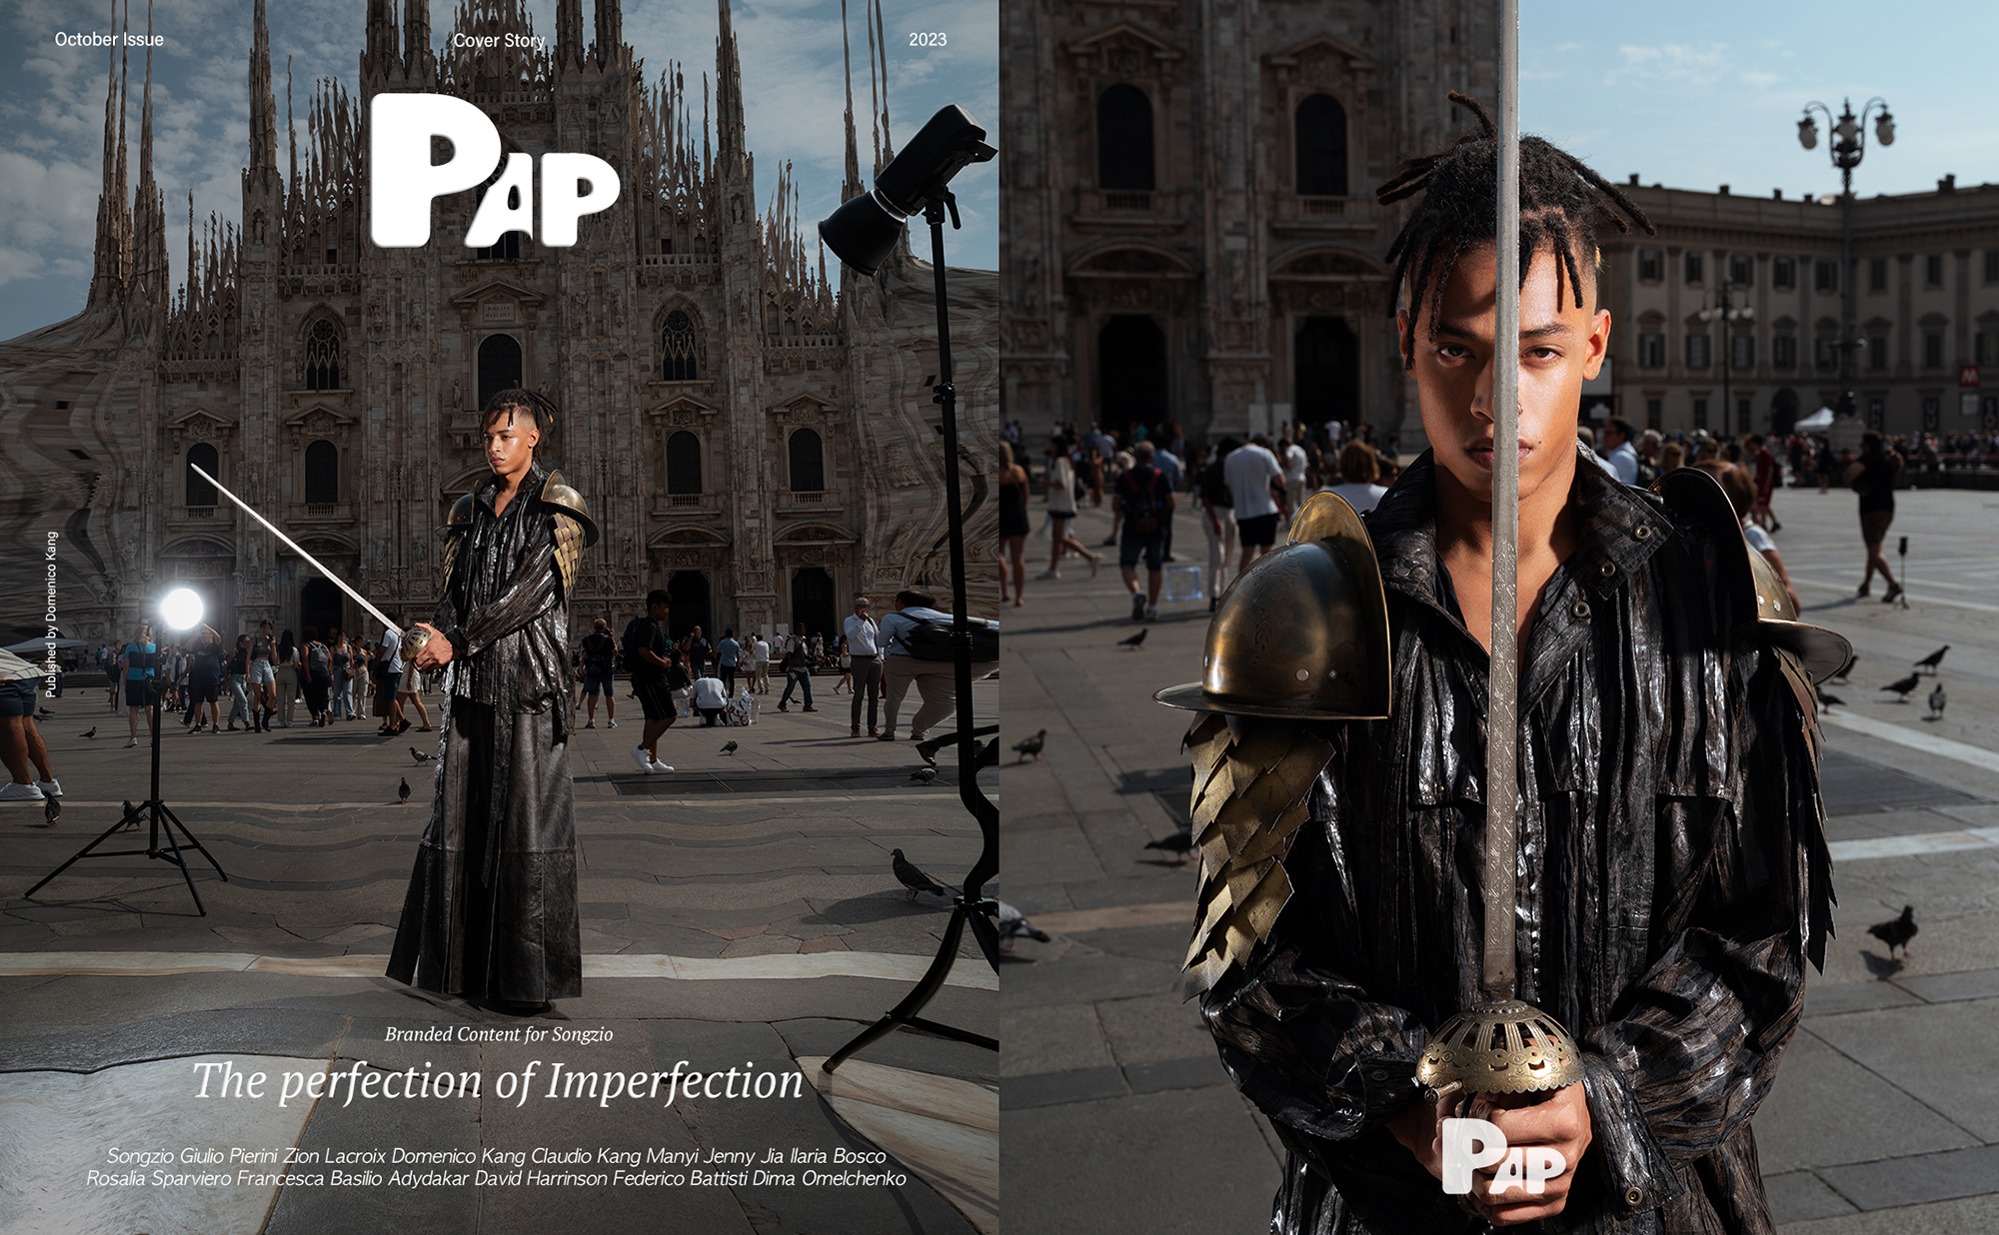 PAP MAGAZINE, 23FW ISSUE COVER STORYOCTOBER 2023&quot;THE PERFECTION OF IMPERFECTION&quot;MILANO, ITALY